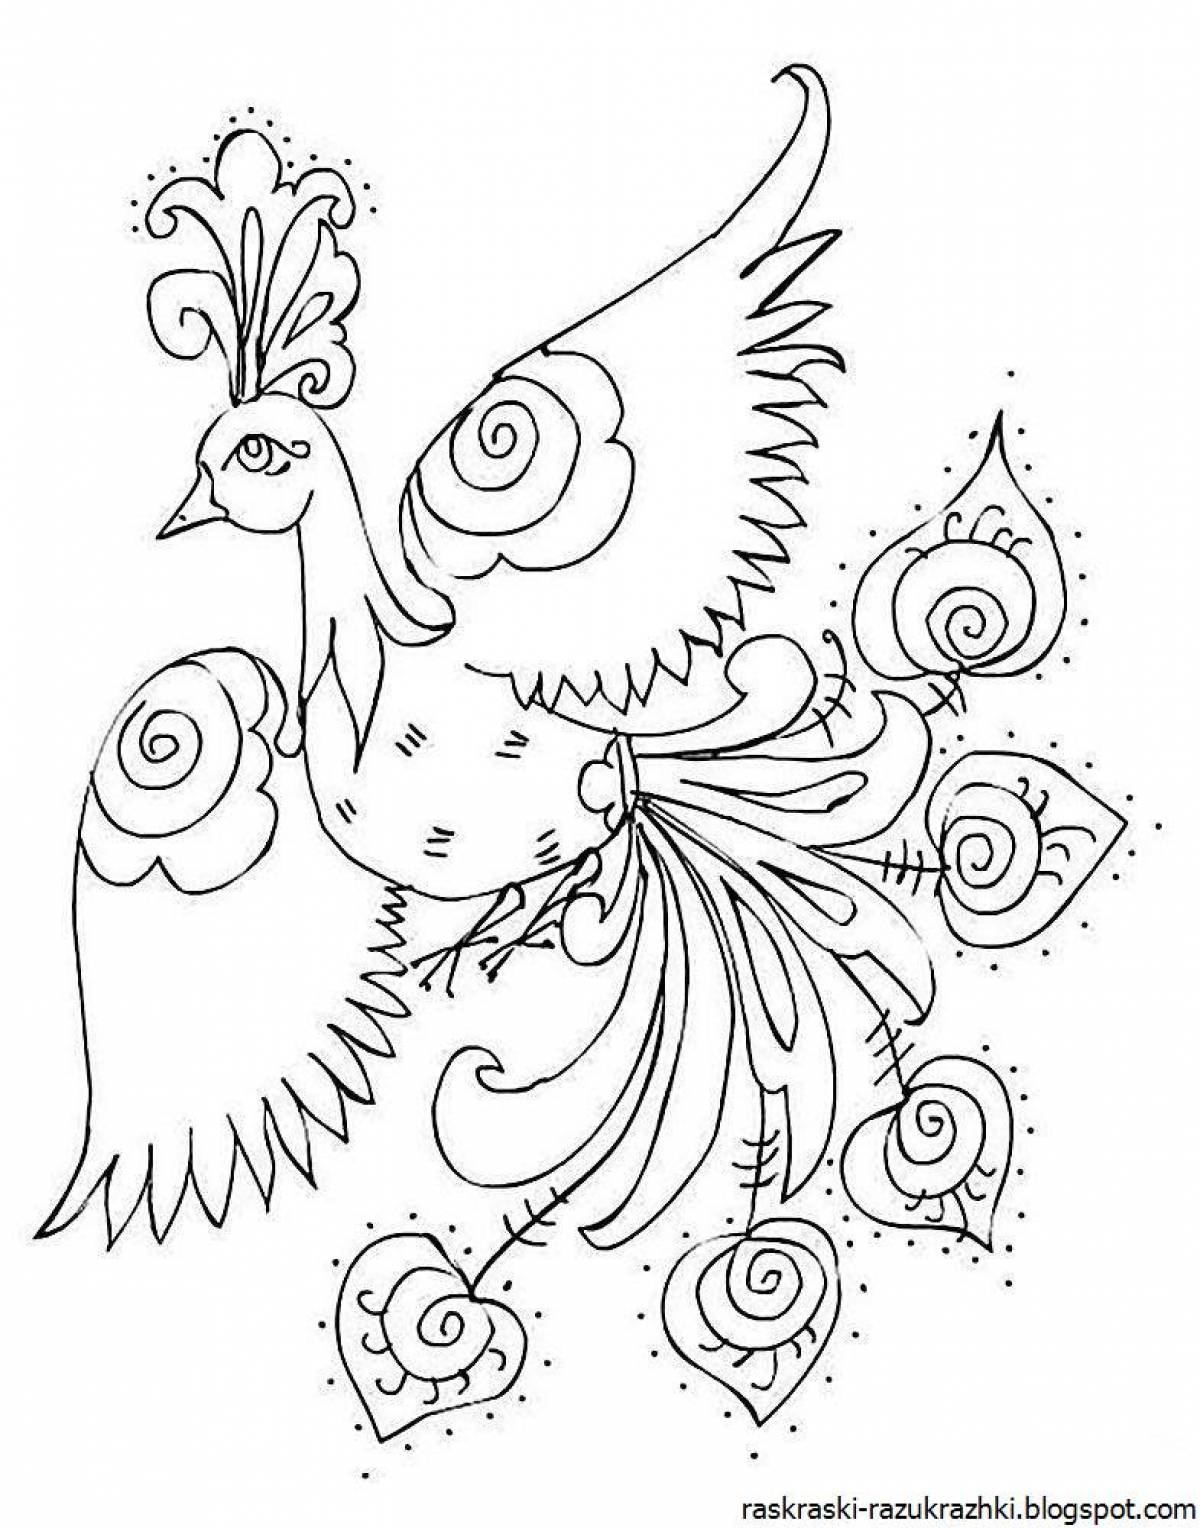 Colorful fire birds coloring page for kids